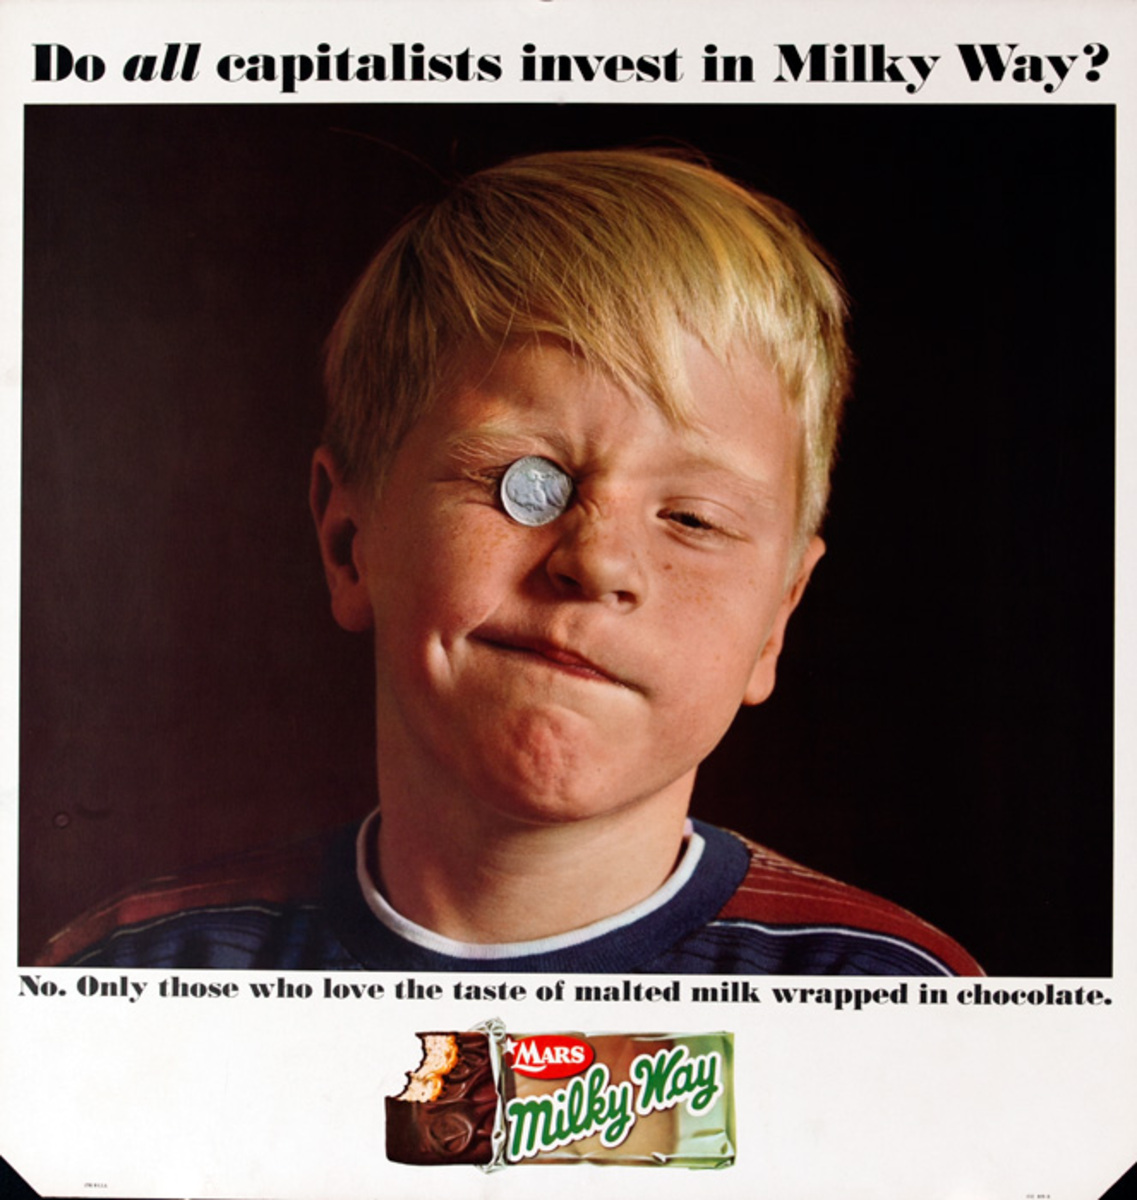 Mars Candy Original Advertising Poster, Do All Capitalists Invest in Milky Way? No. Only those who love the taste of malted milk wrapped in chocolate.